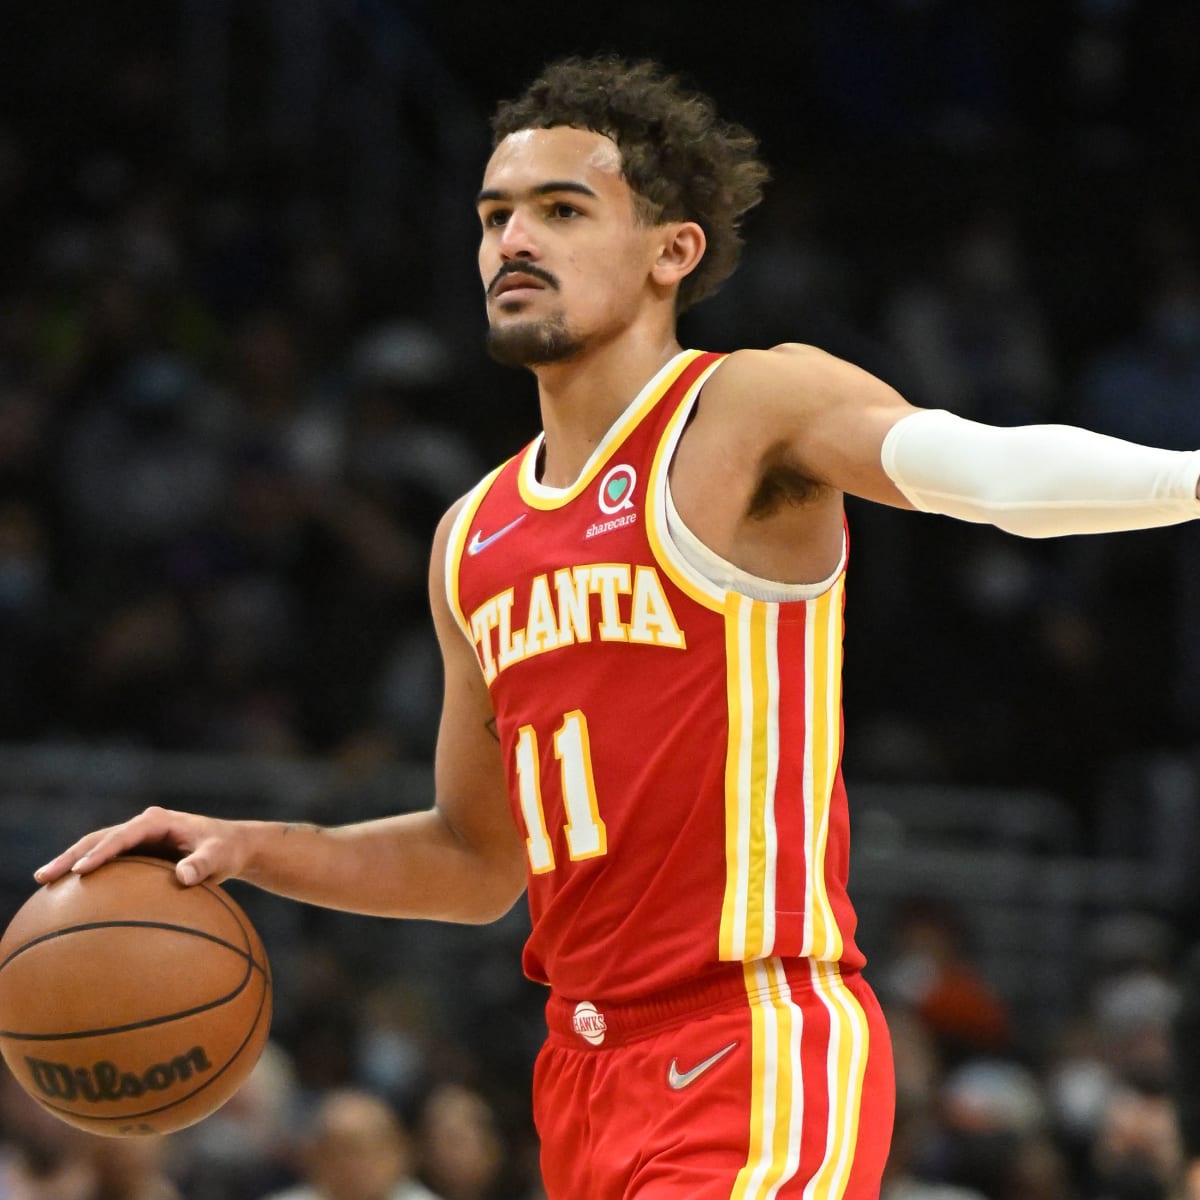 Hawks guard Trae Young fined $20,000 for incident with official following  loss to Mavs